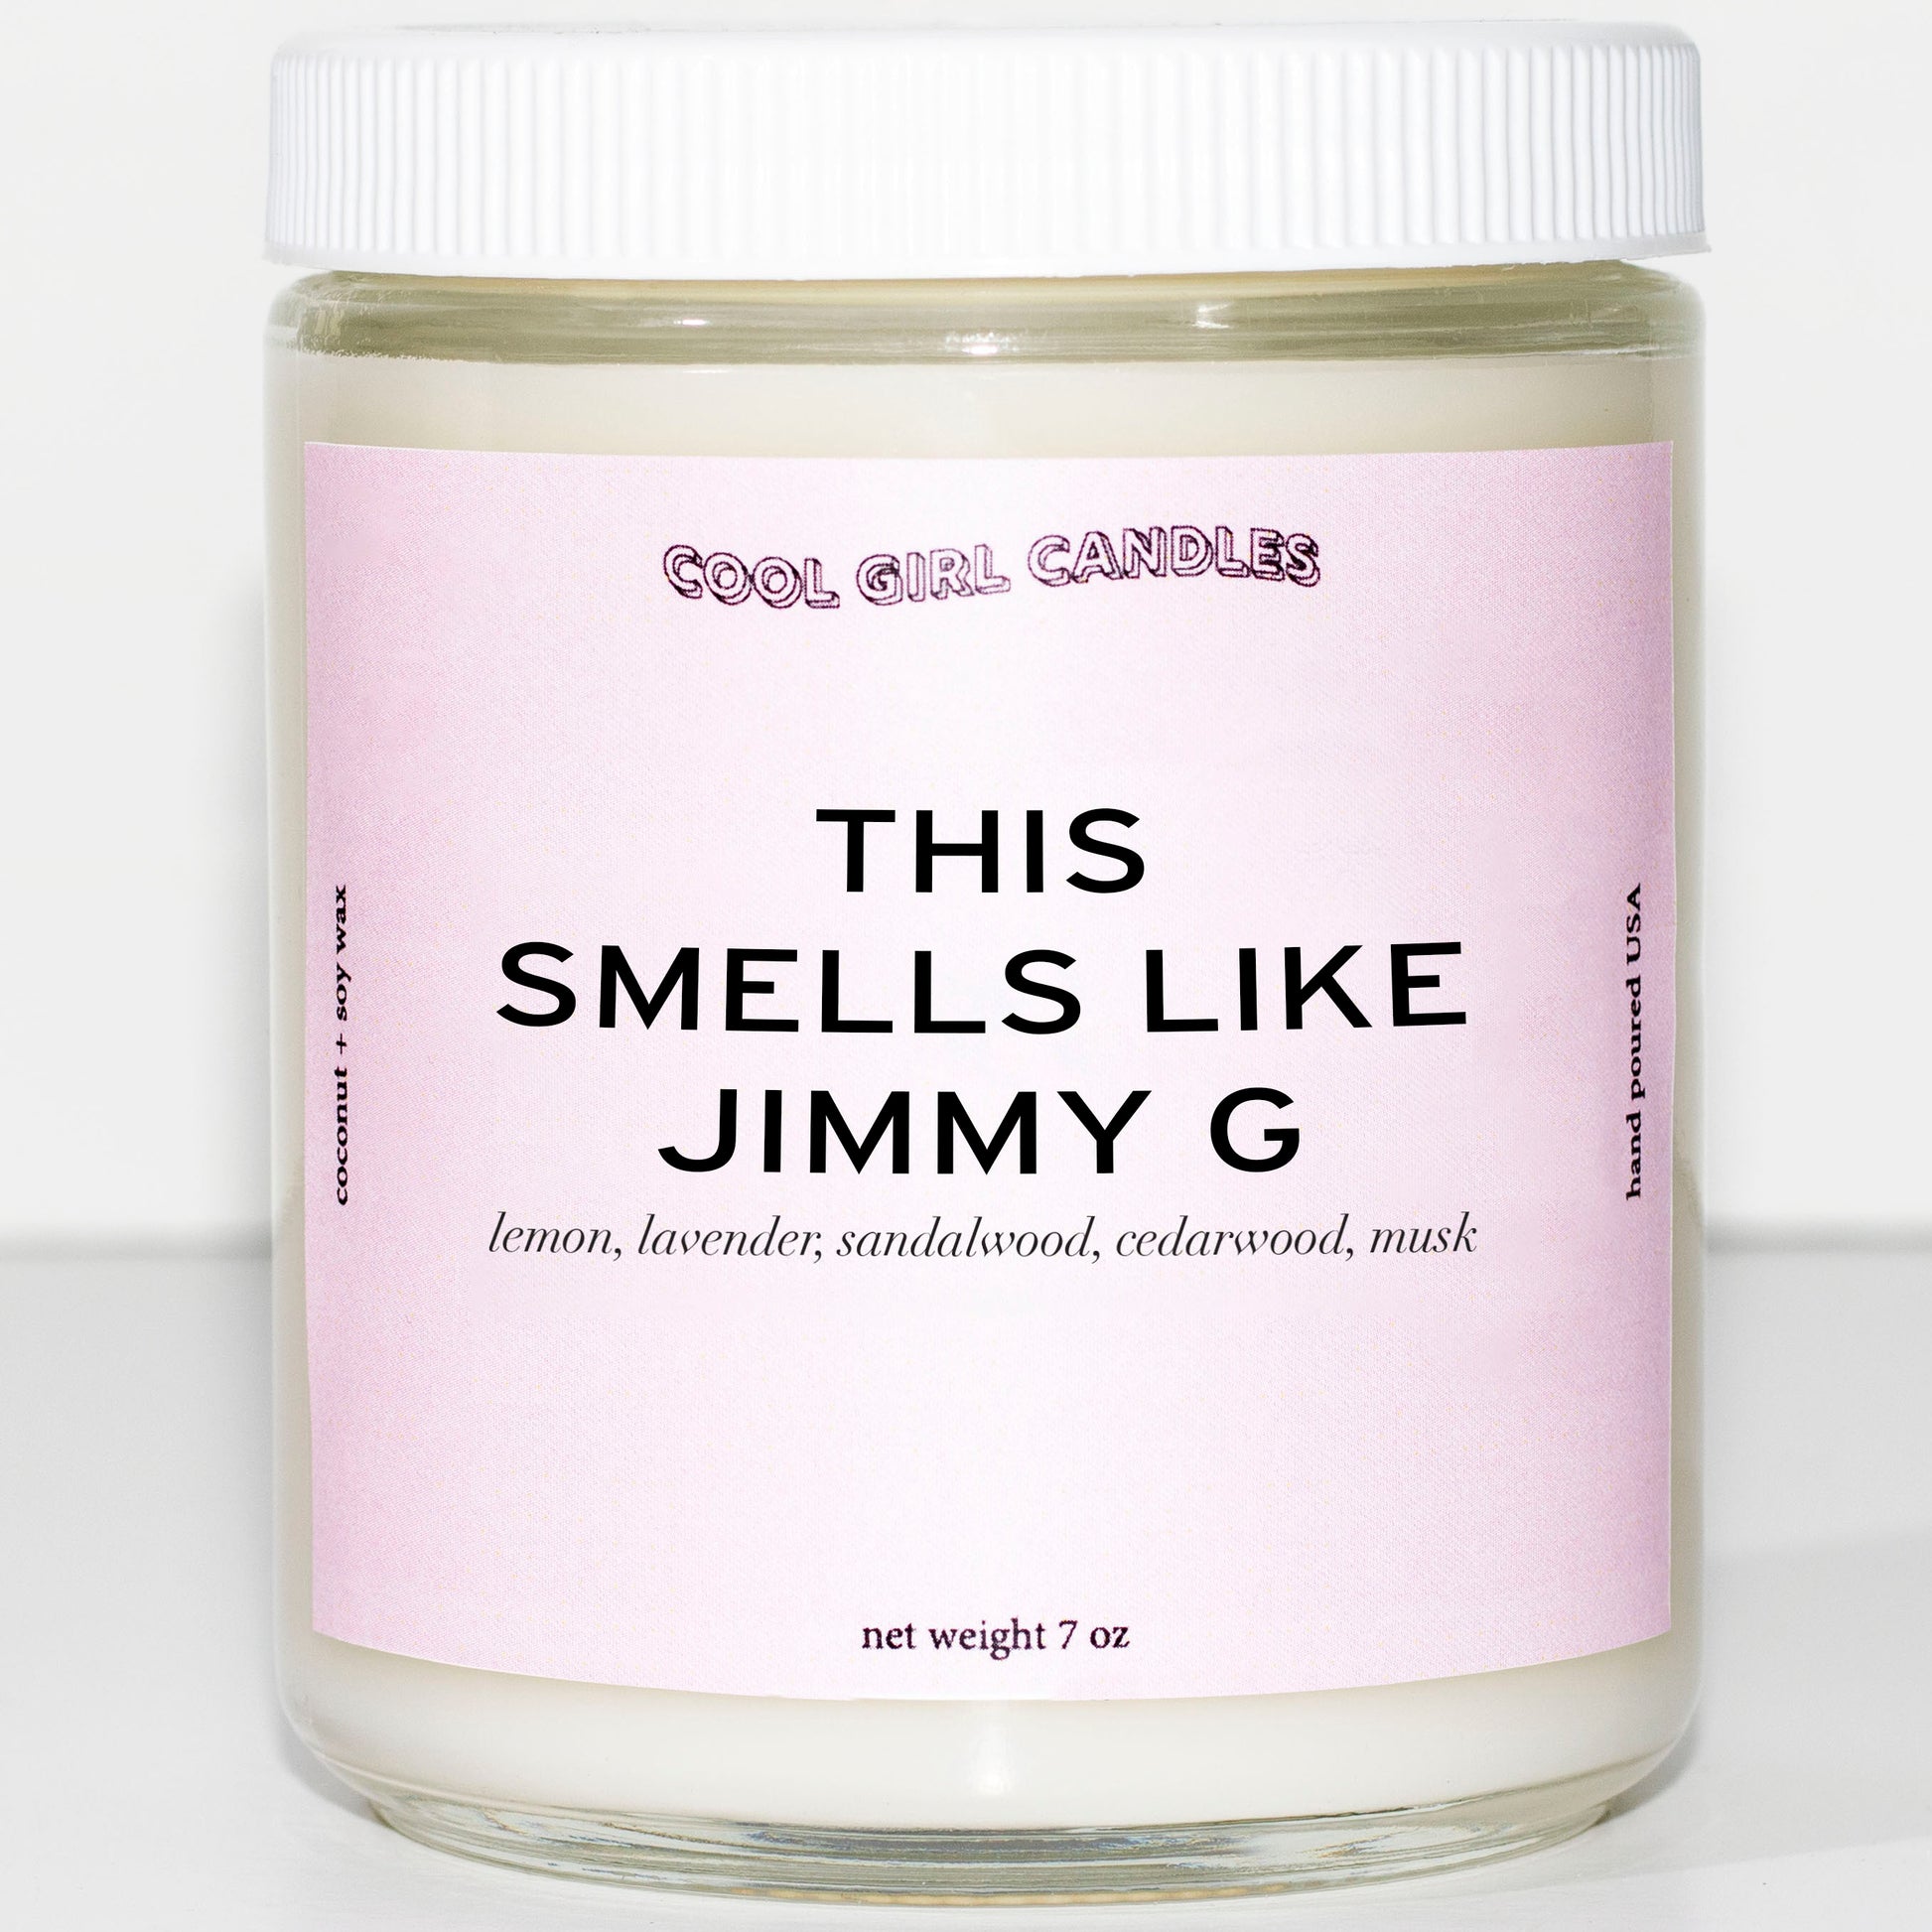 This smells like Jimmy Garoppolo candle made to smell like your favorite quarterback in the NFL